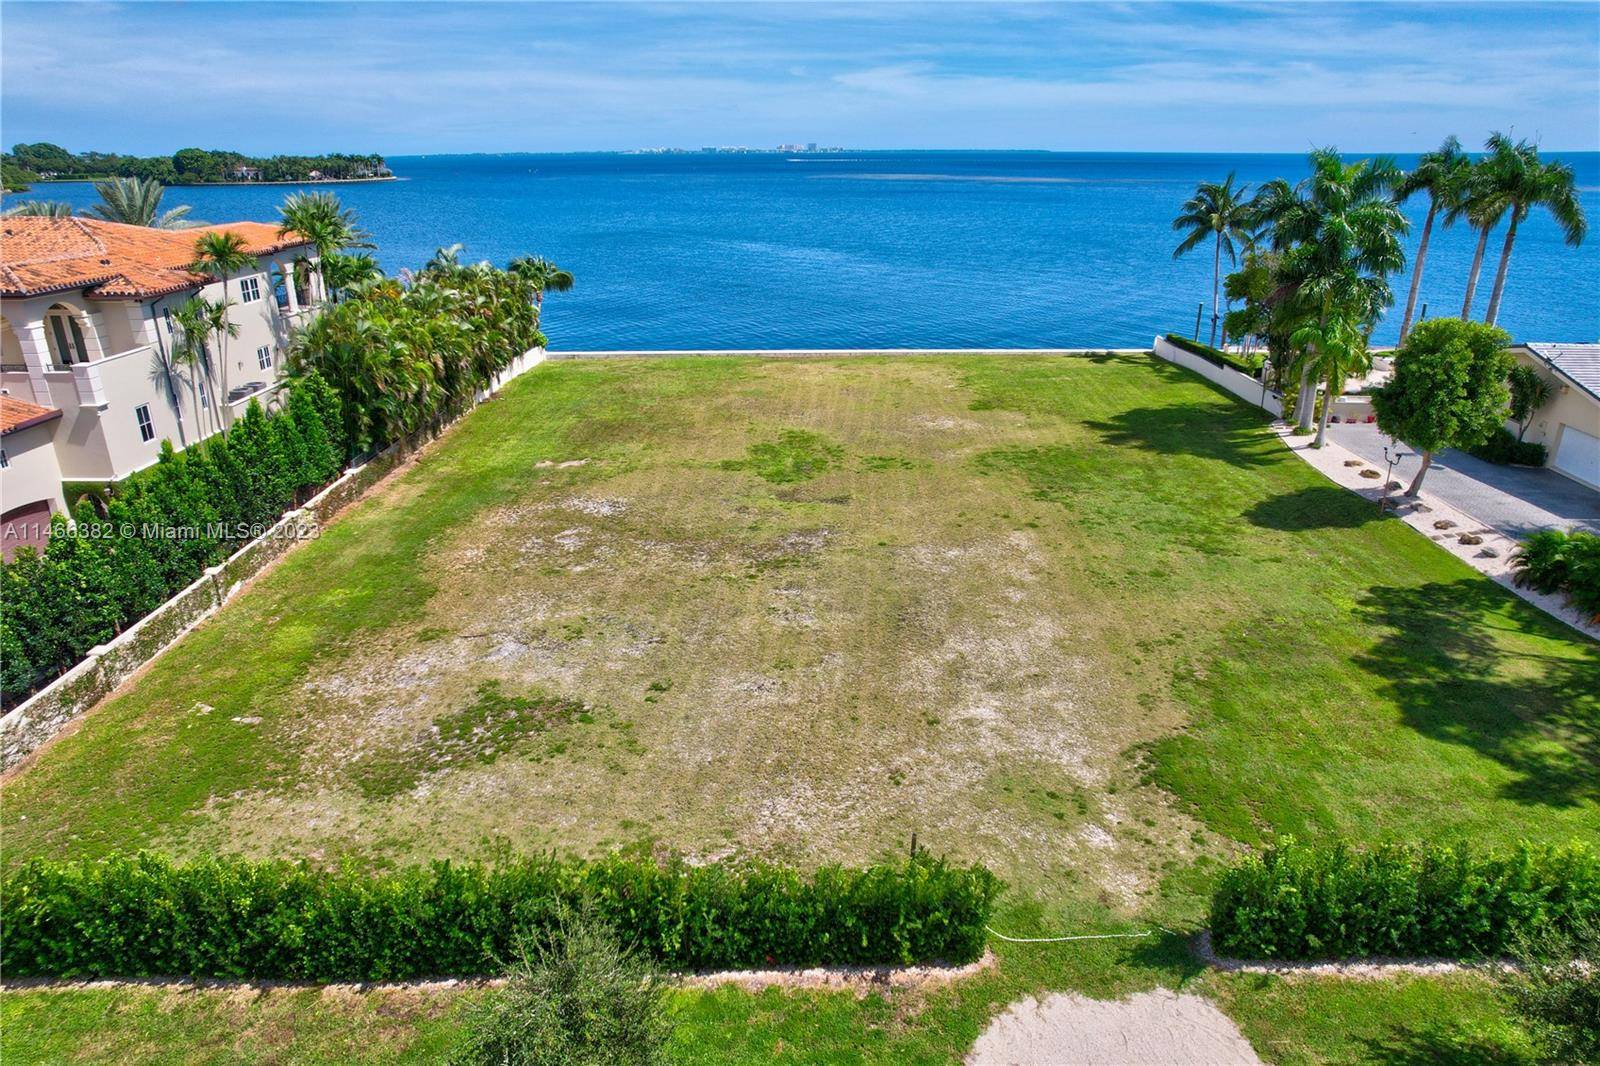 Rare opportunity to acquire a prime Bayfront property in Old Cutler Bay, one of the last vacant bay front 35, 200 SF lot with 150FT of seawall with amazing views ...